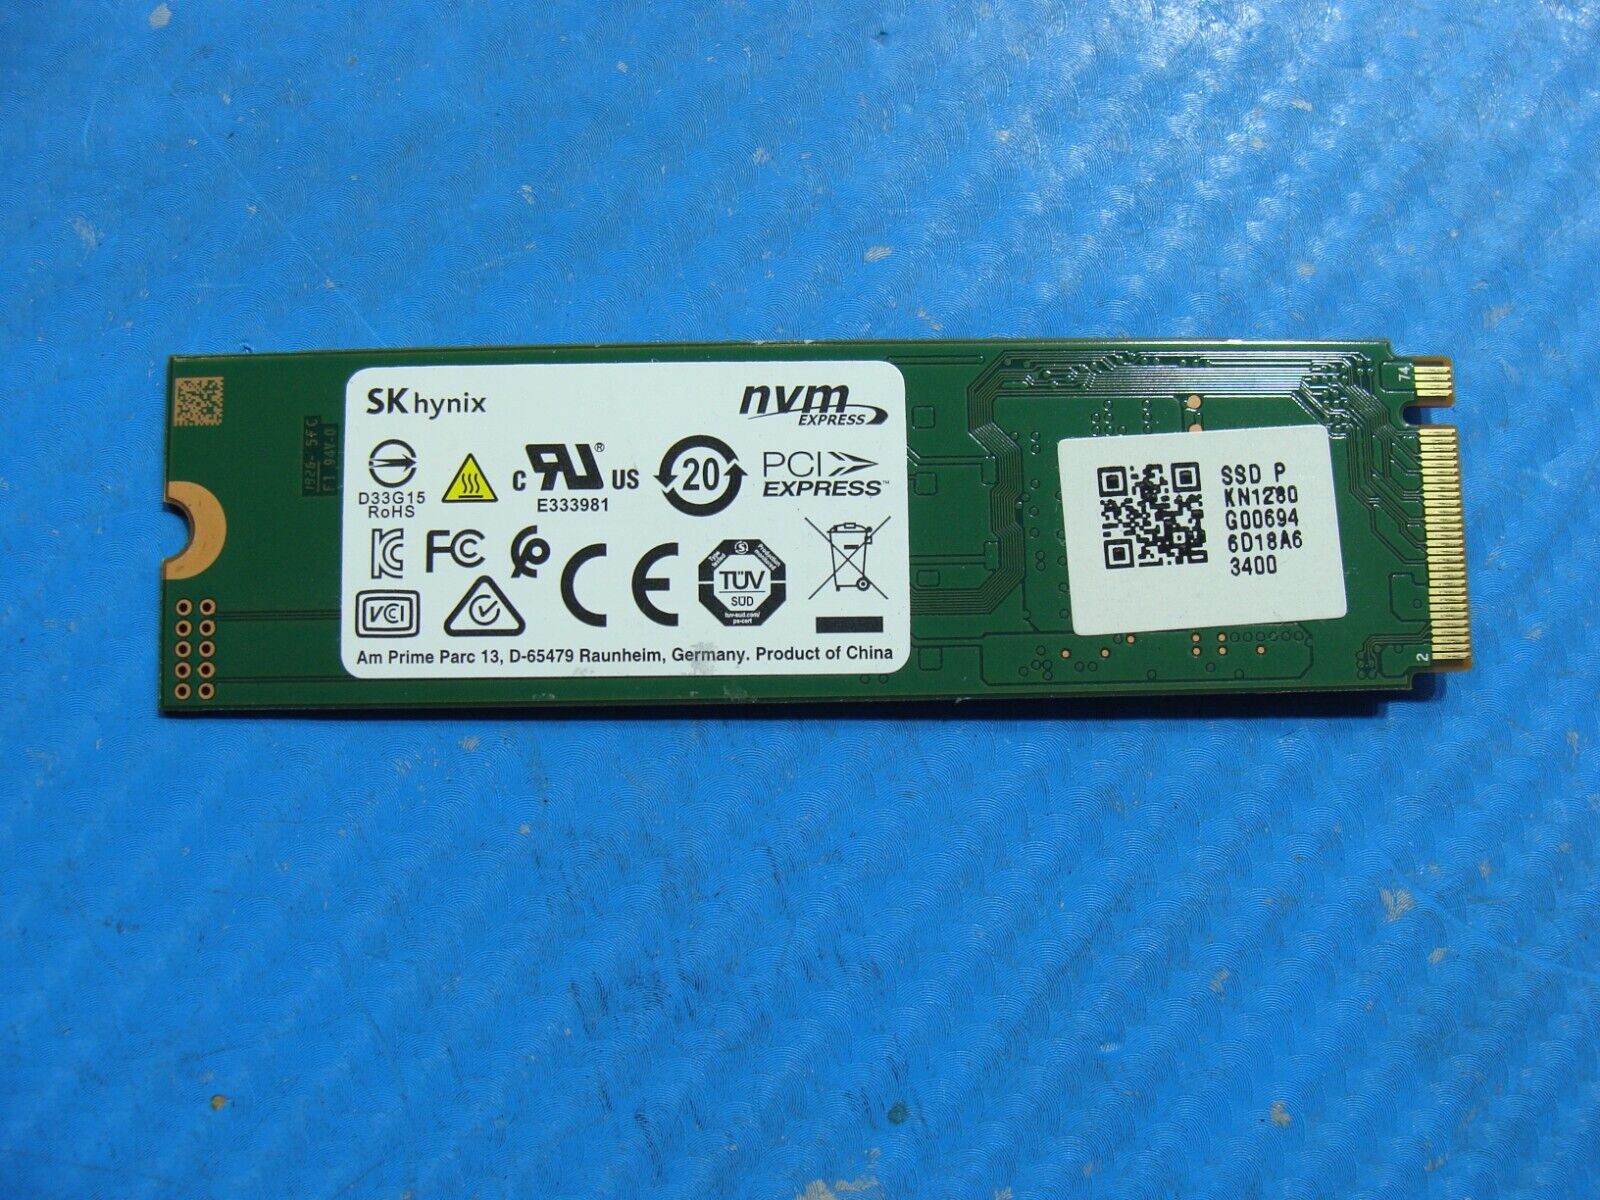 Acer A515-43 SK Hynix 128GB NVMe M.2 SSD Solid State Drive HFM128GDJTNG-8310A